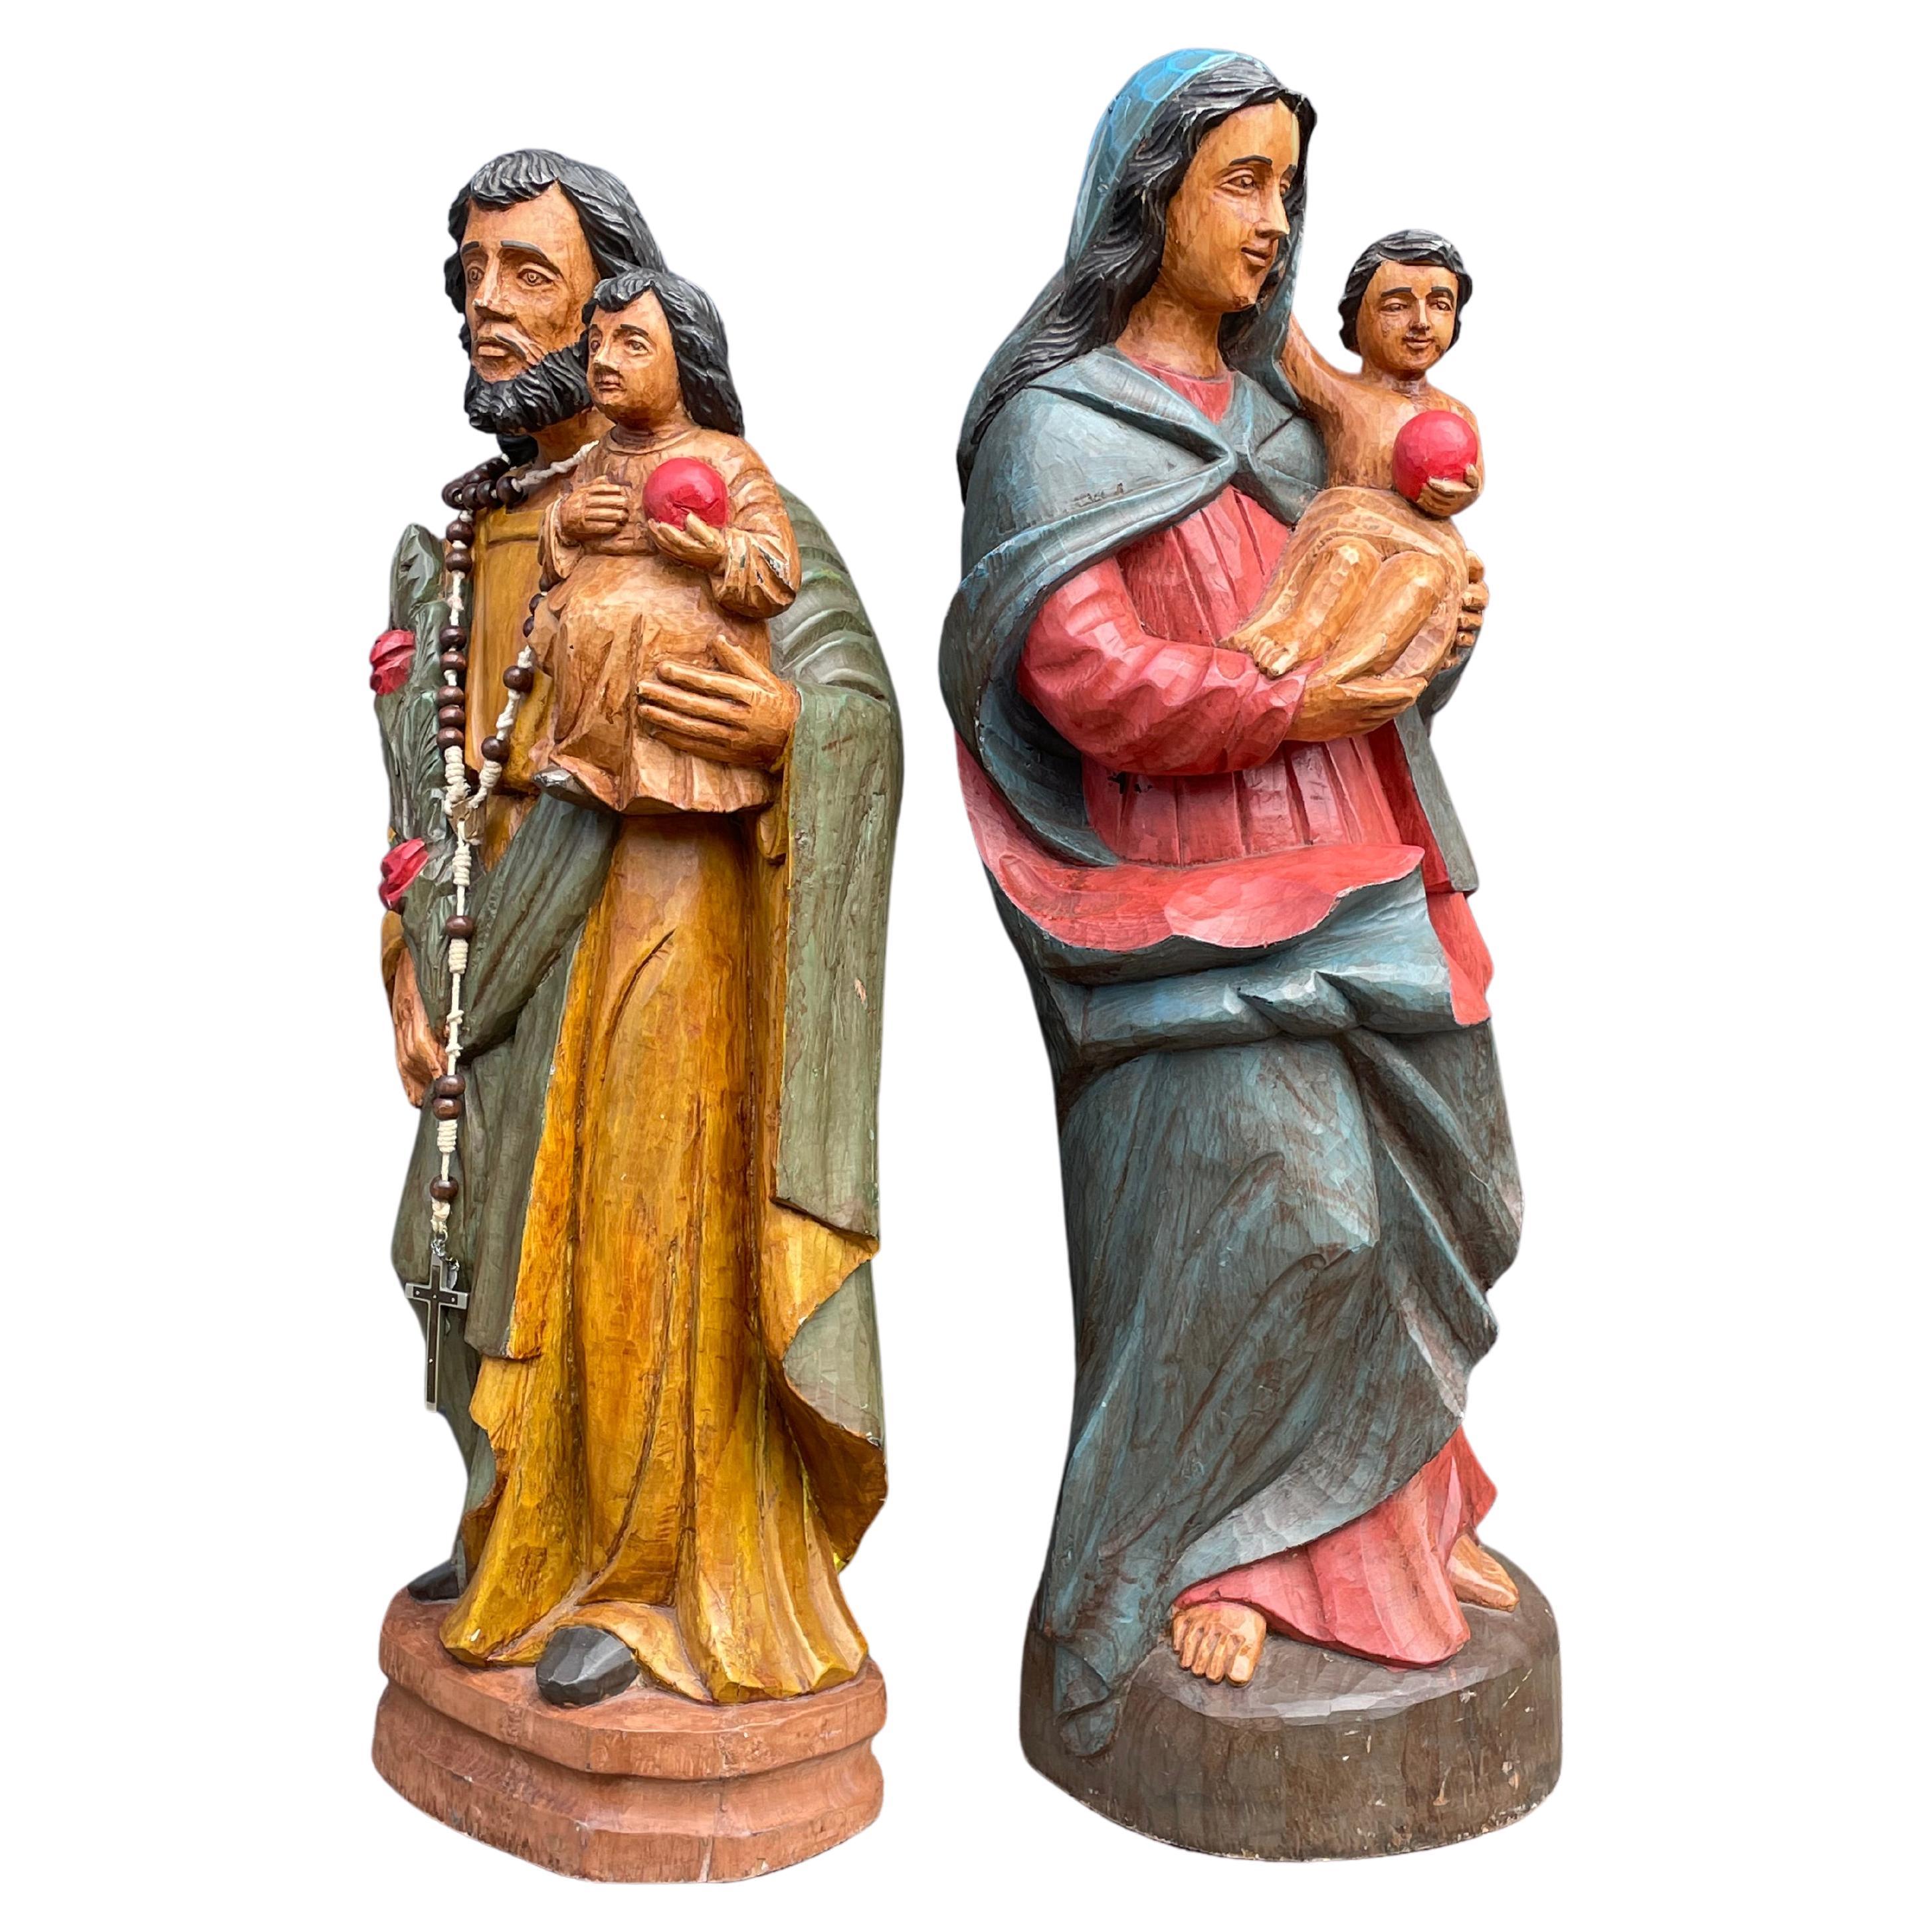 Large Pair of Hand Carved Wooden Mary & Joseph Sculptures, Both with Child Jesus im Angebot